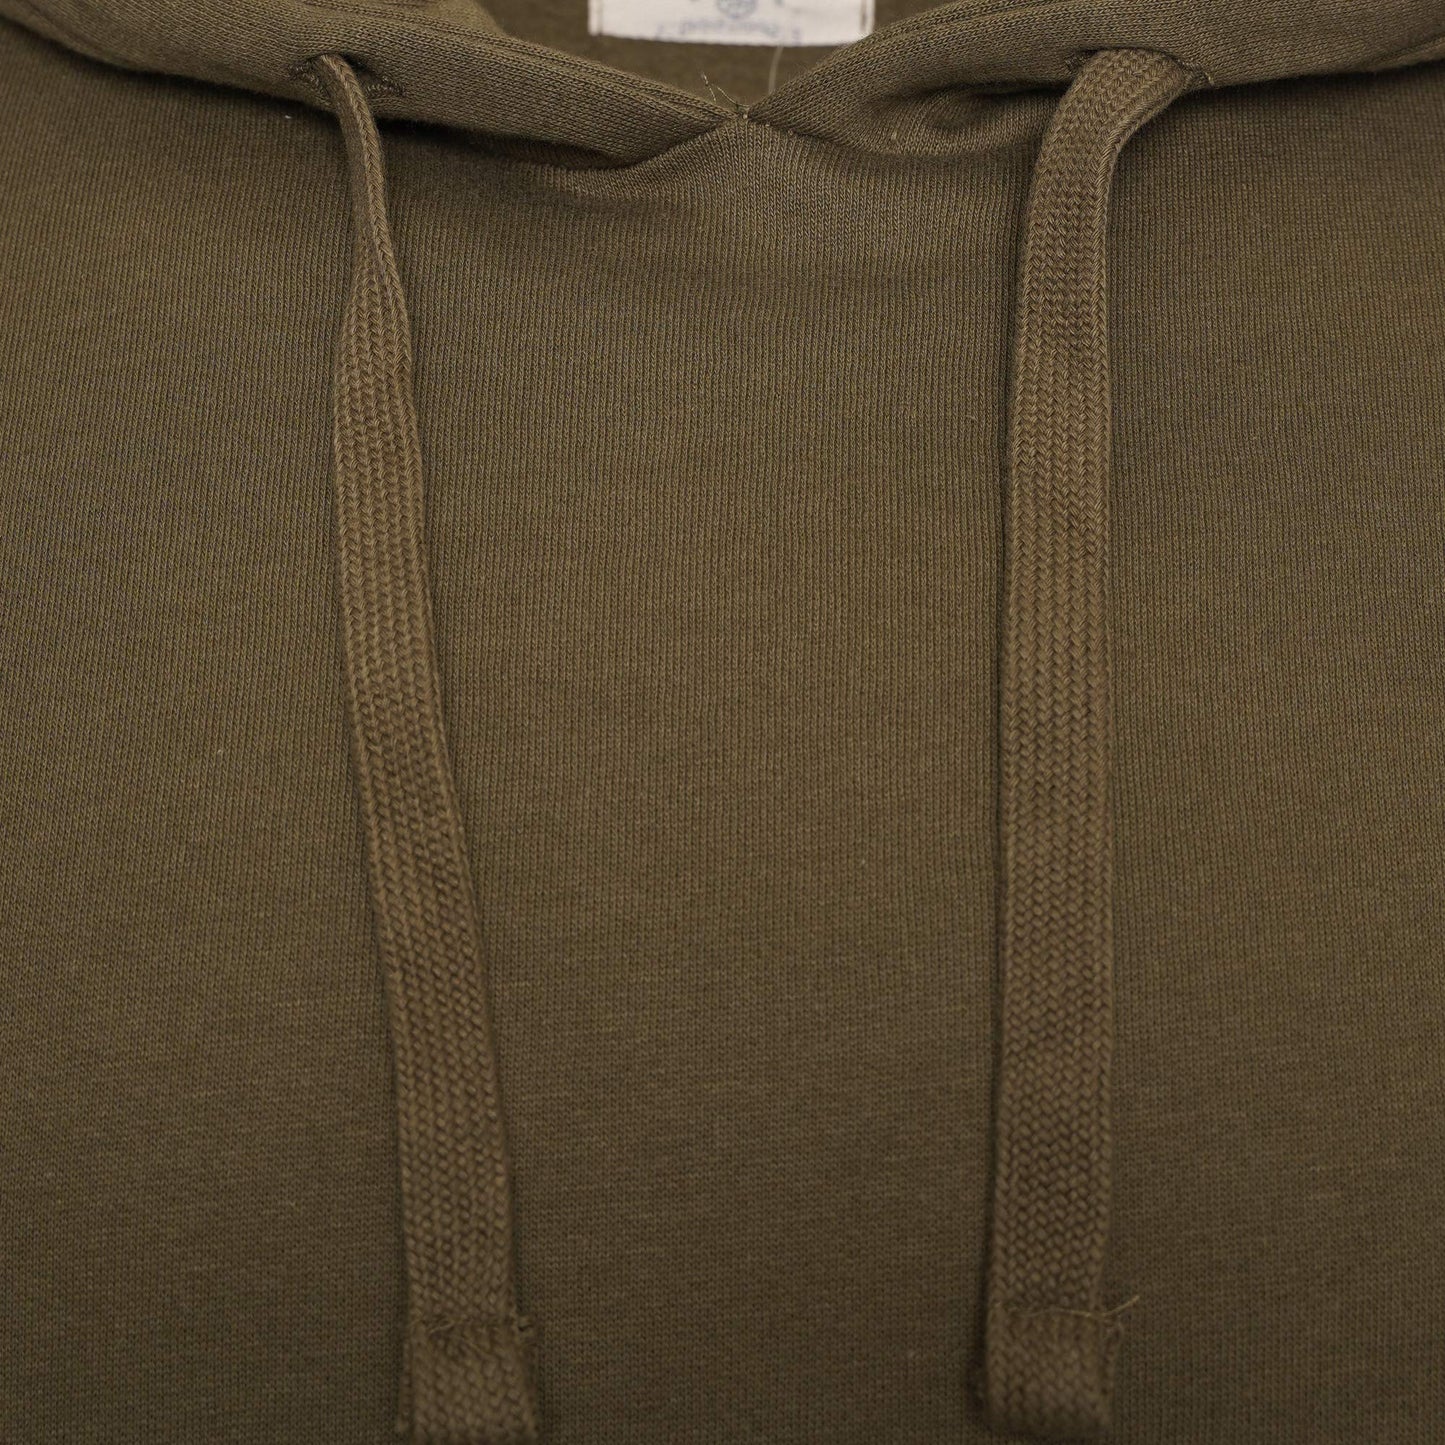 Classic Plain - Pullover Hoodie